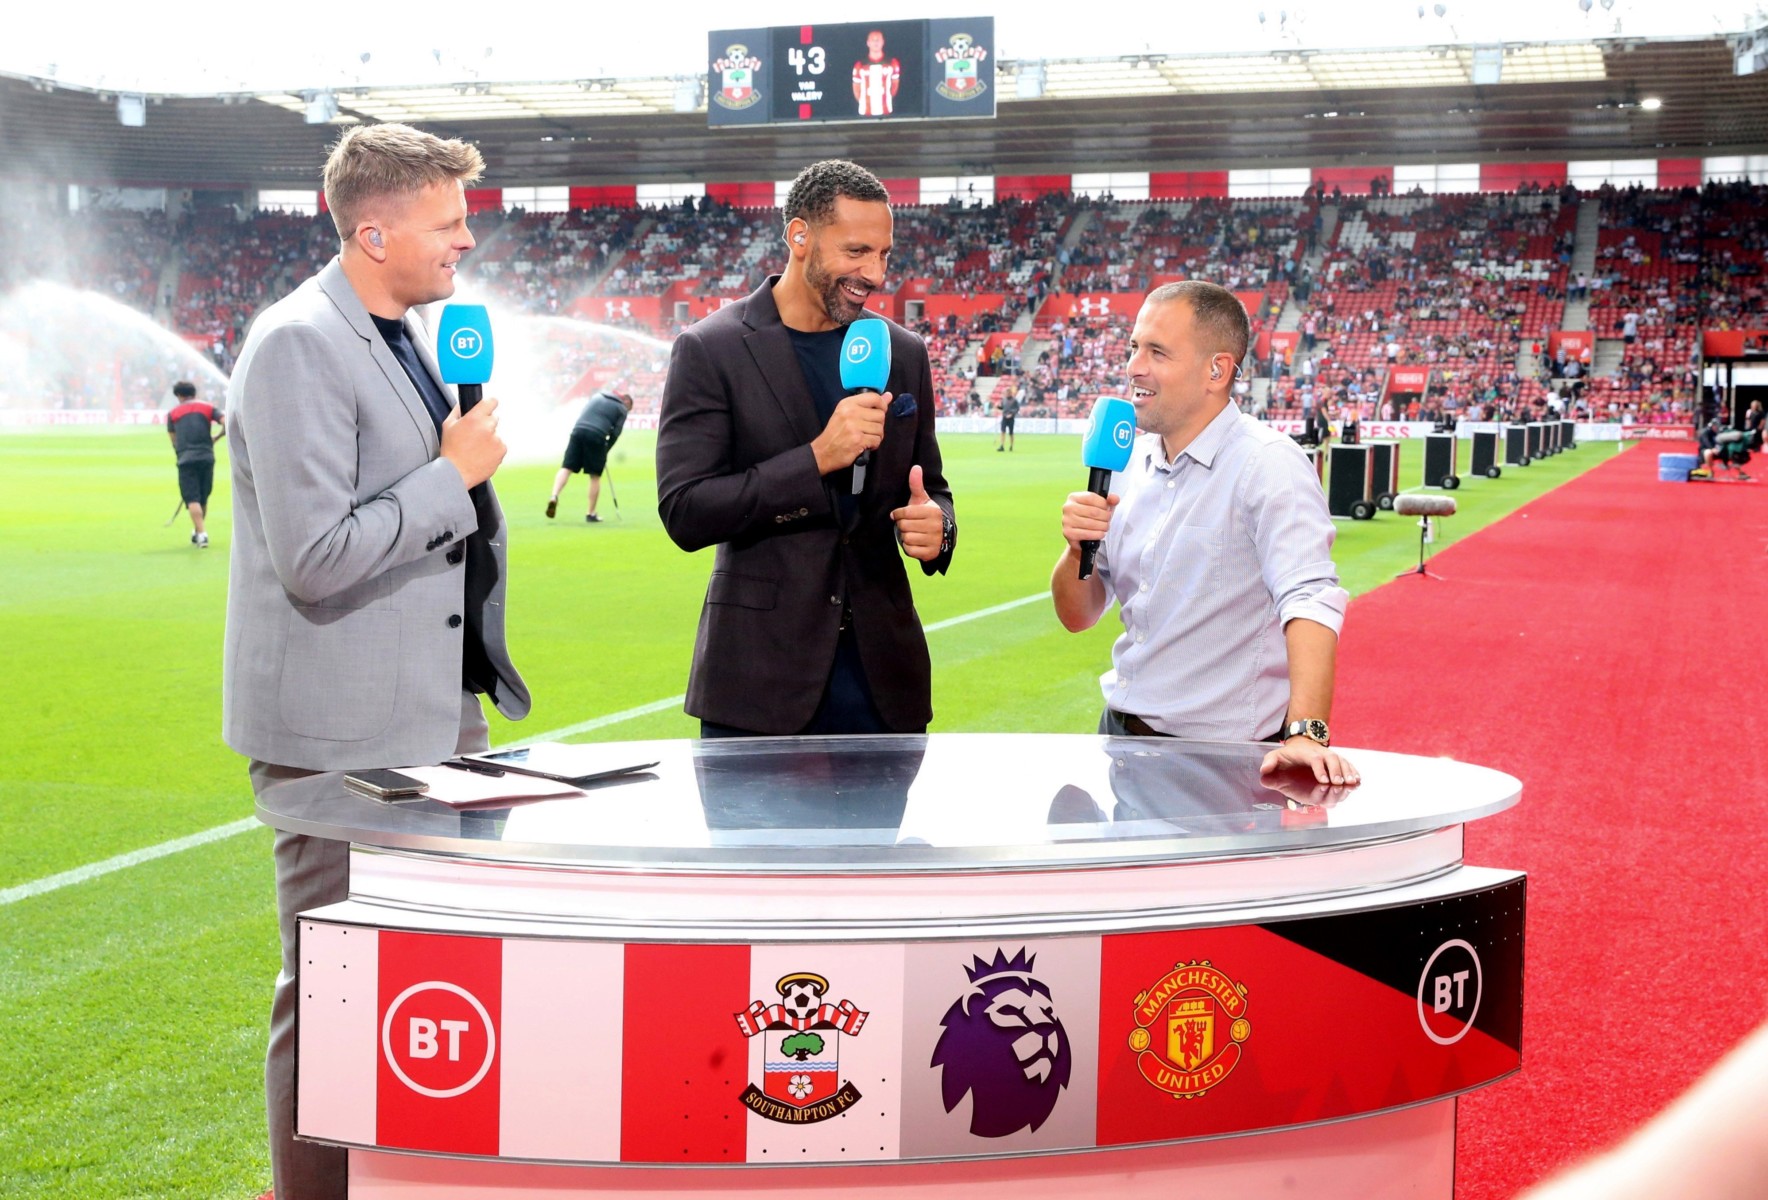 , Premier League risk breaching £3bn TV contract with Sky Sports and BT Sport if they don’t finish season by end of July